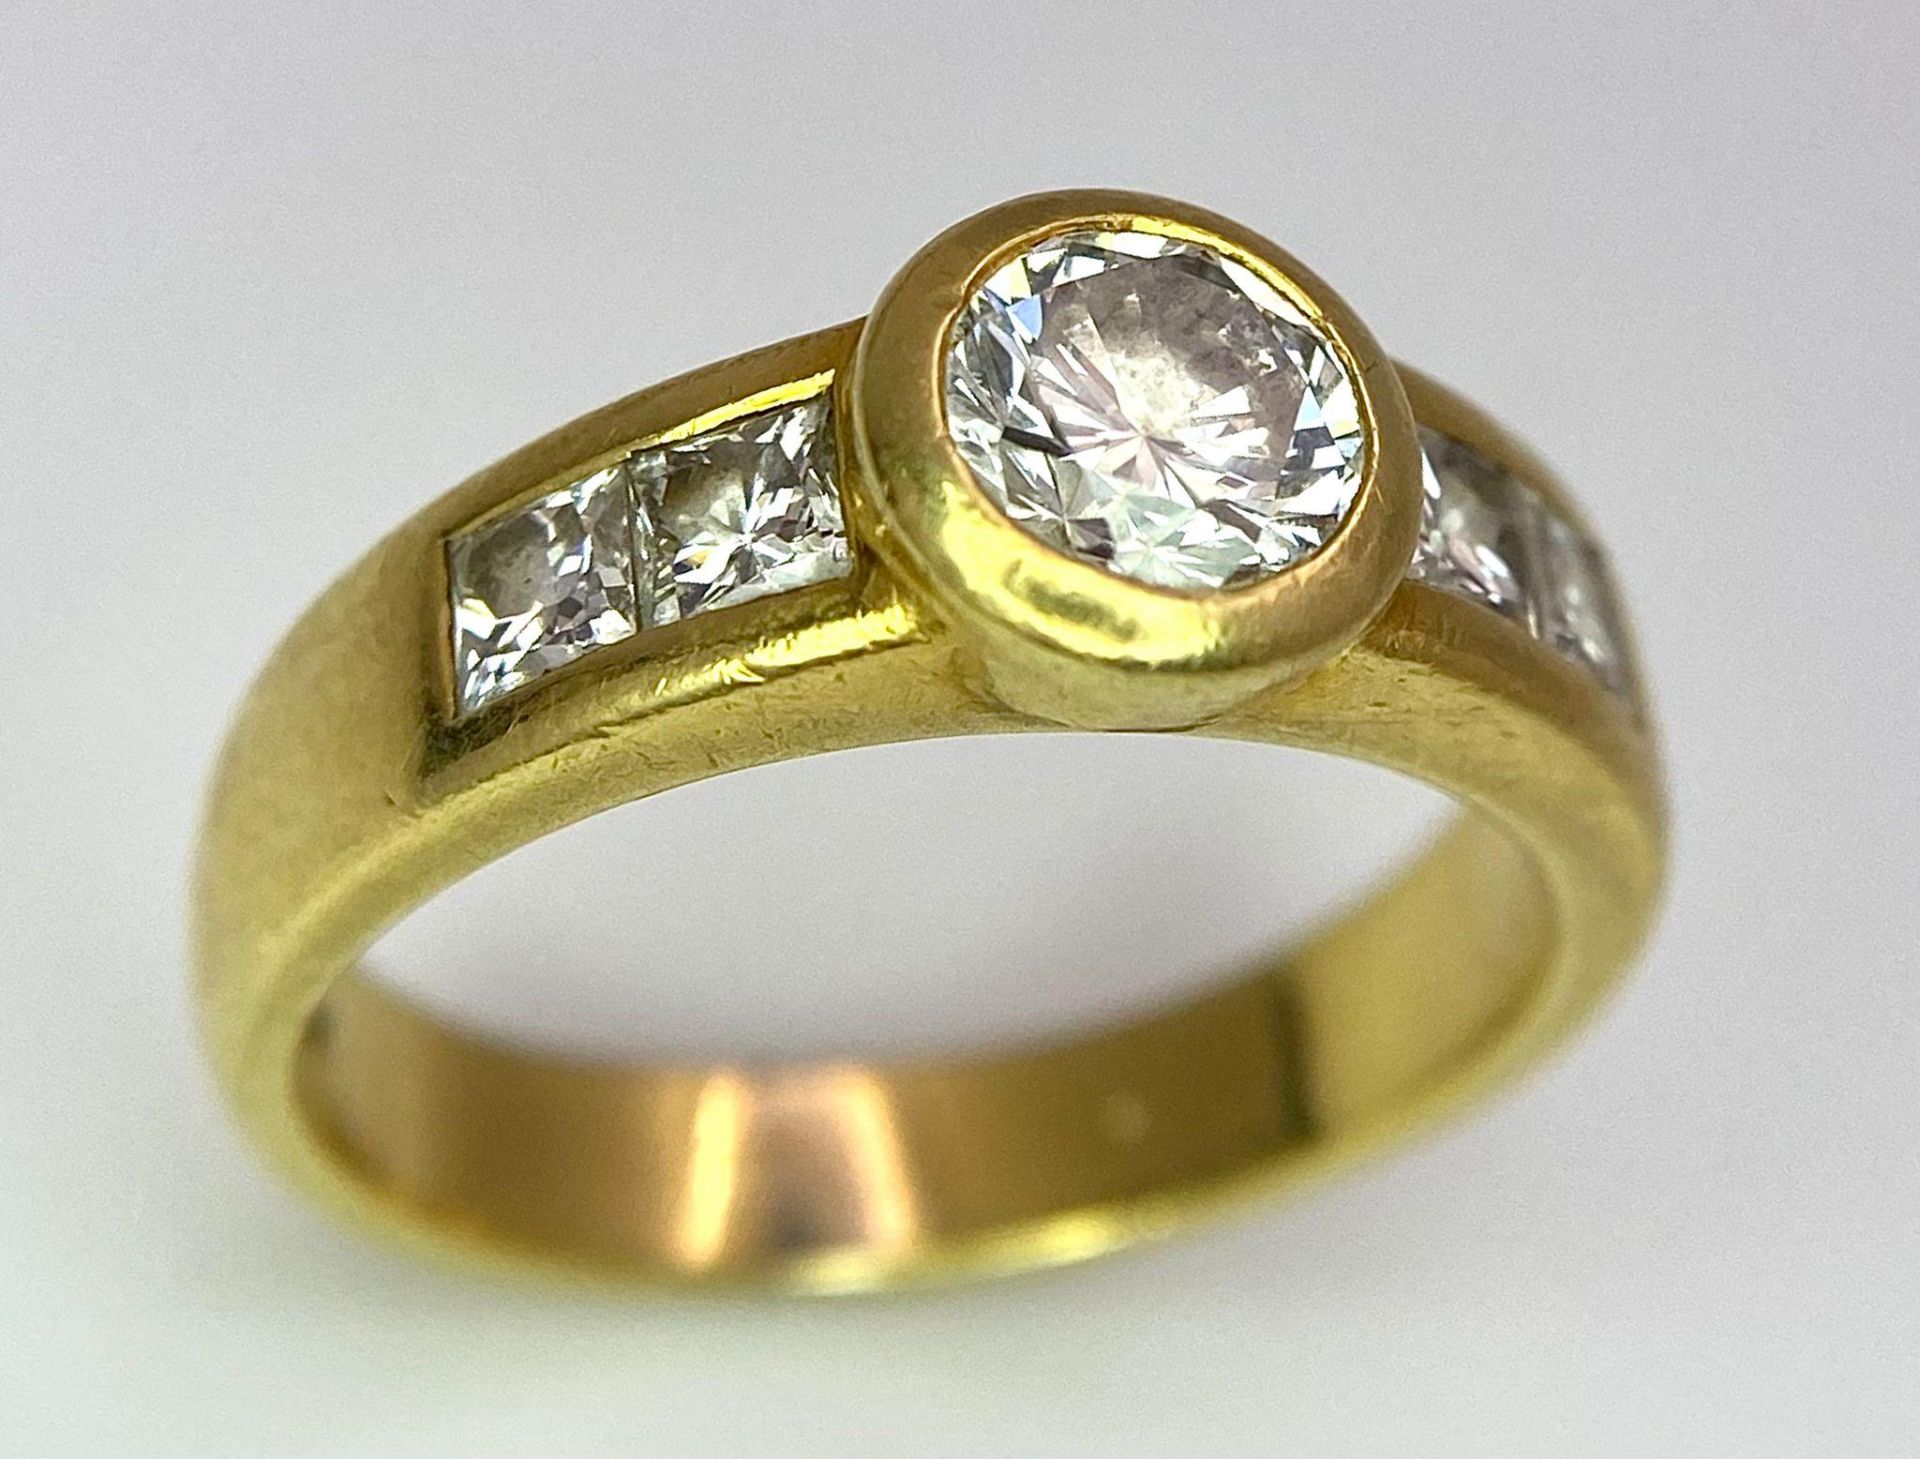 An 18K Yellow Gold Diamond Ring - Main 0.45ct bright white centre stone with 0.35ctw of diamond - Image 3 of 9